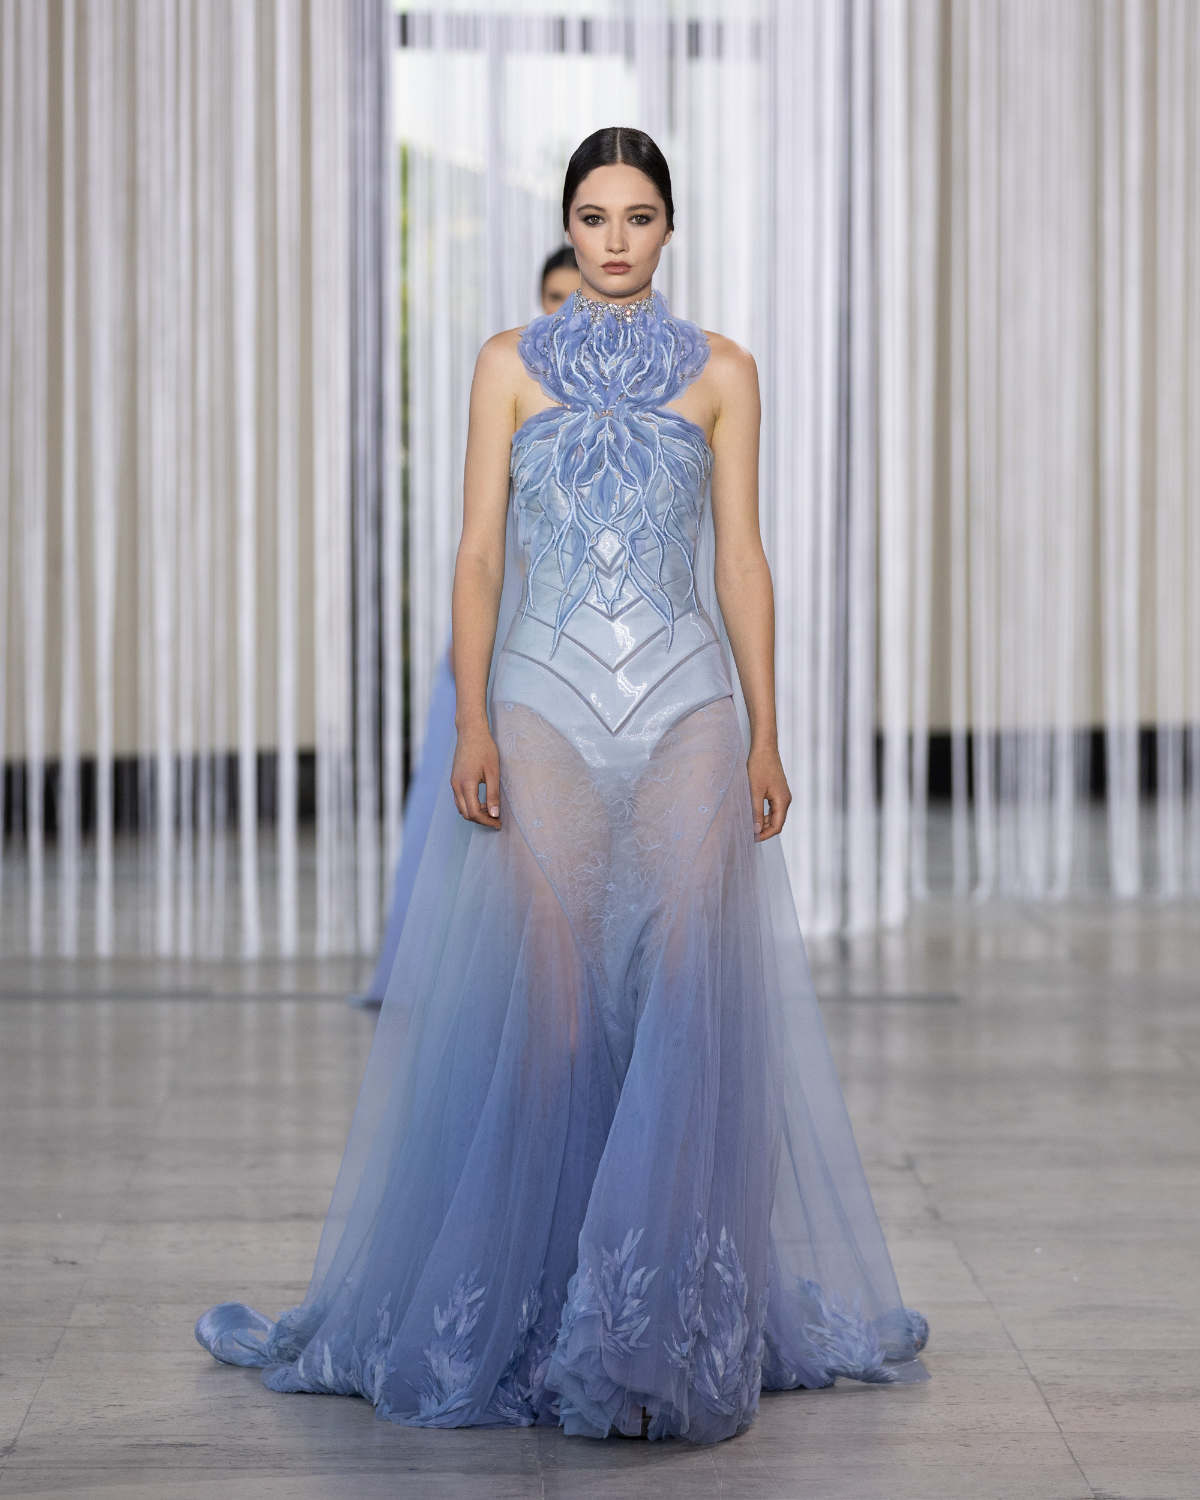 Tony Ward Presents His New Couture Fall Winter 2023/24 Collection ...